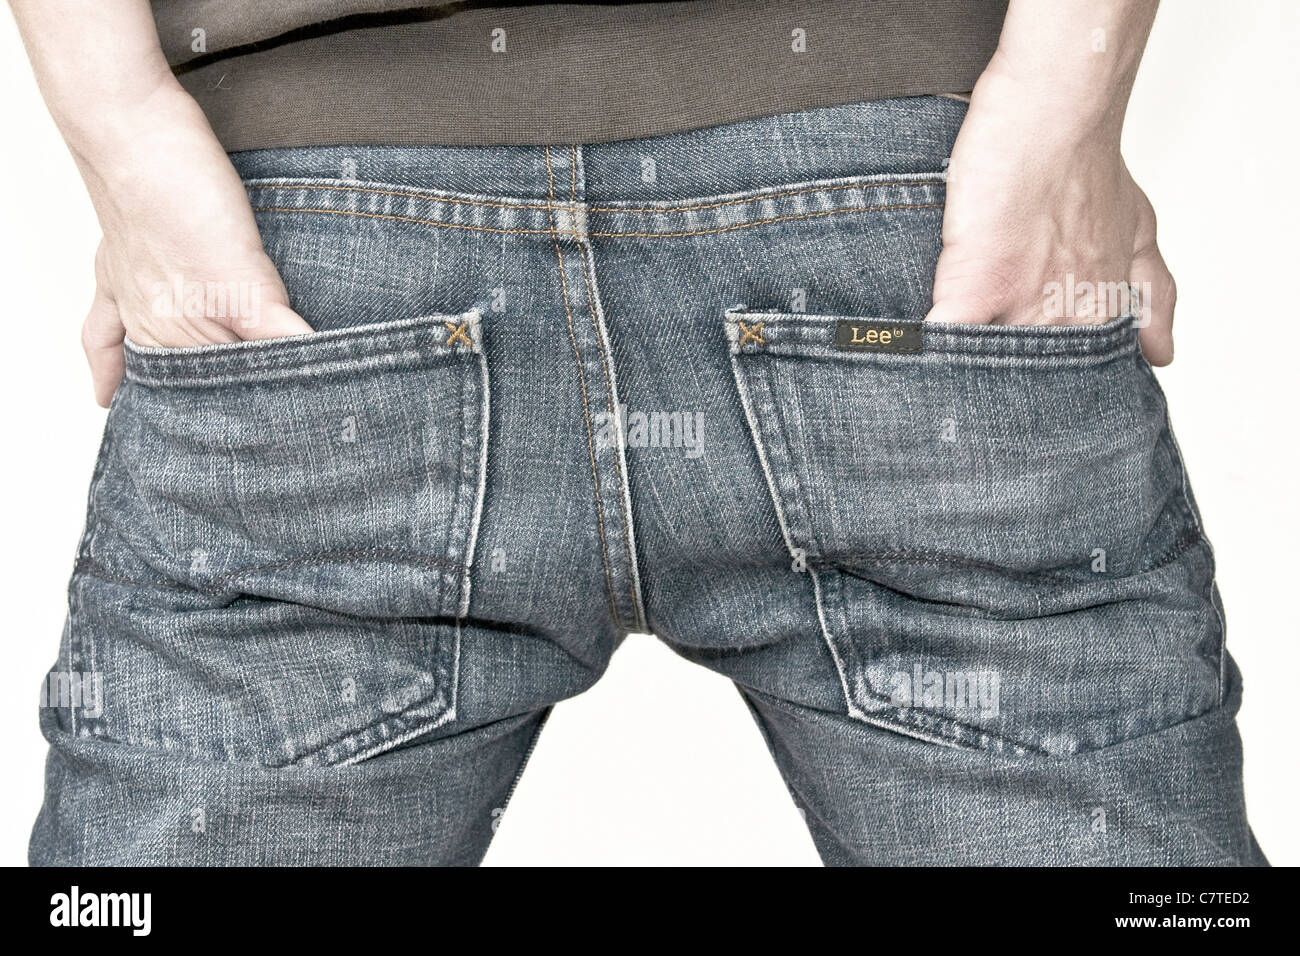 rear view of young man putting hands in pockets of his jeans Stock Photo